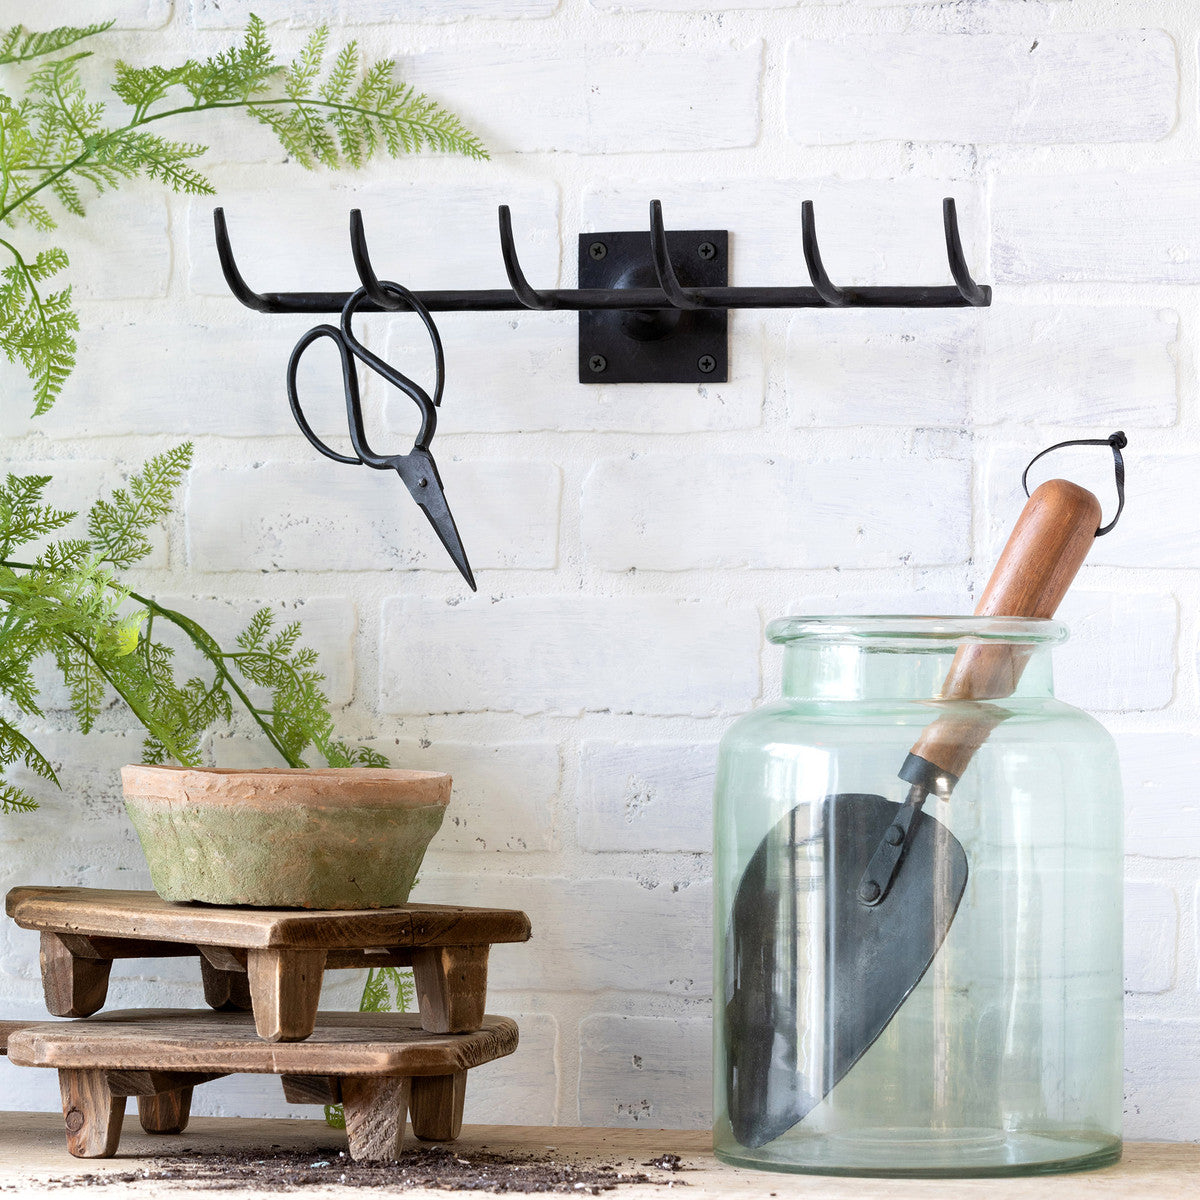 Rustic Forged Iron Garden Tools Hanger